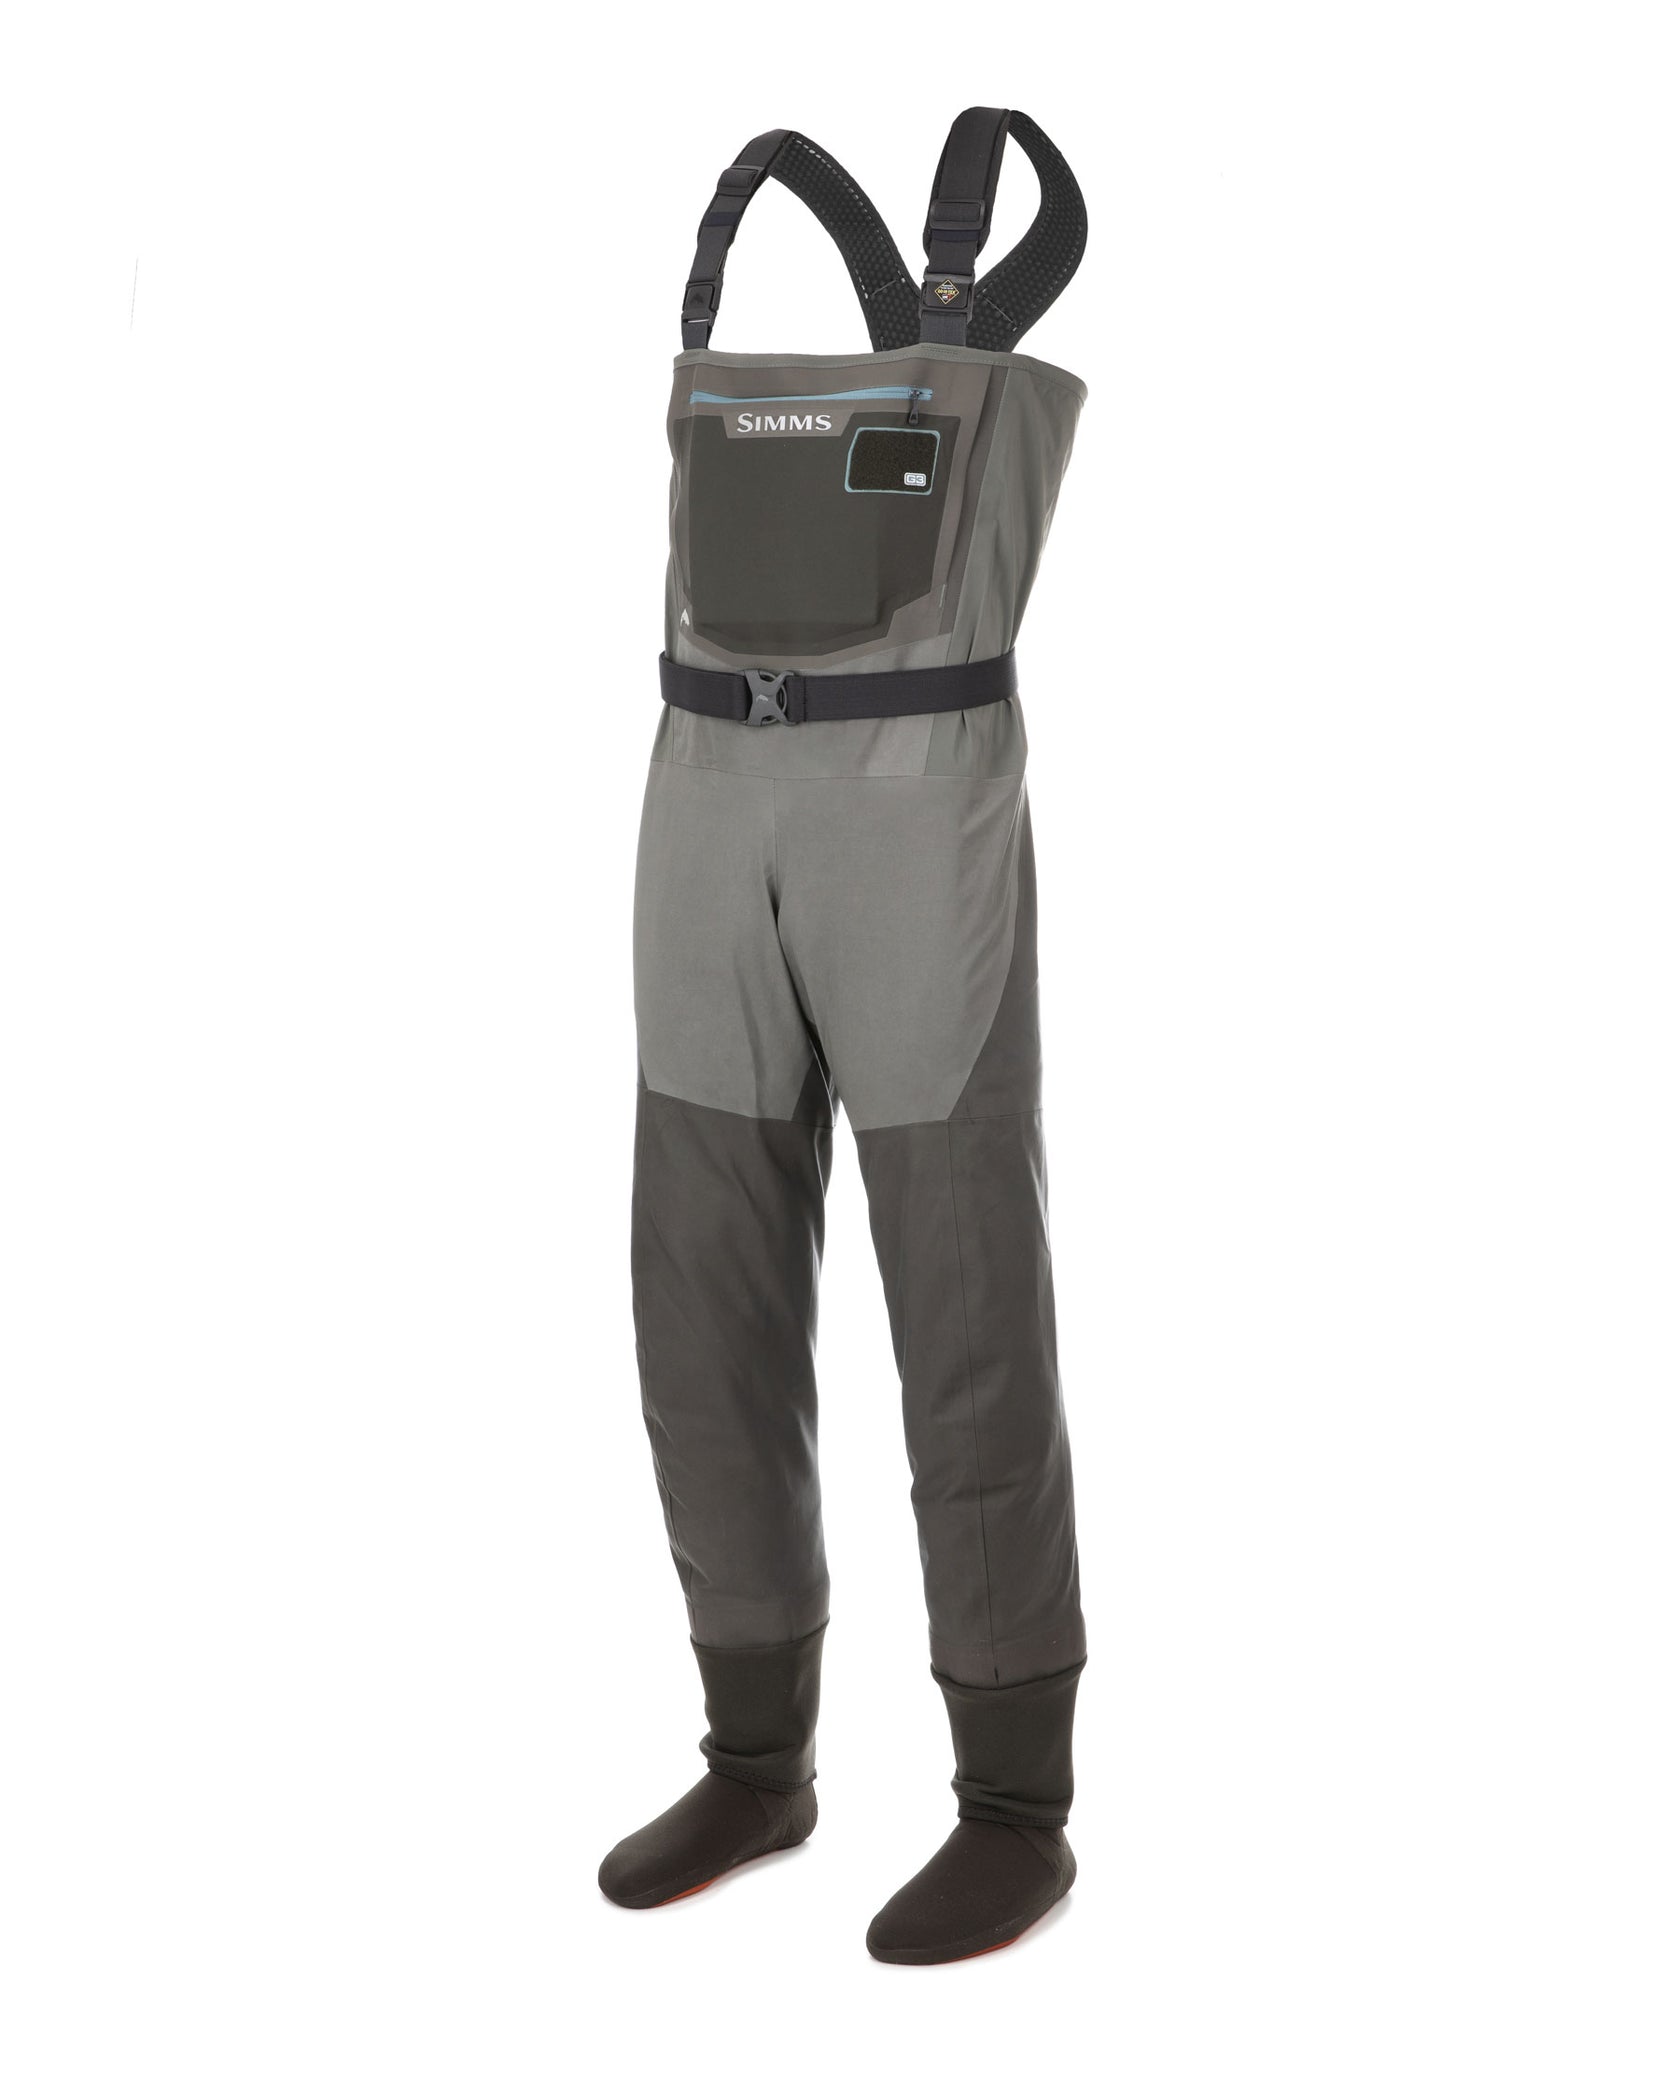 Simms W's G3 Guide Waders - LT (Large Tall)